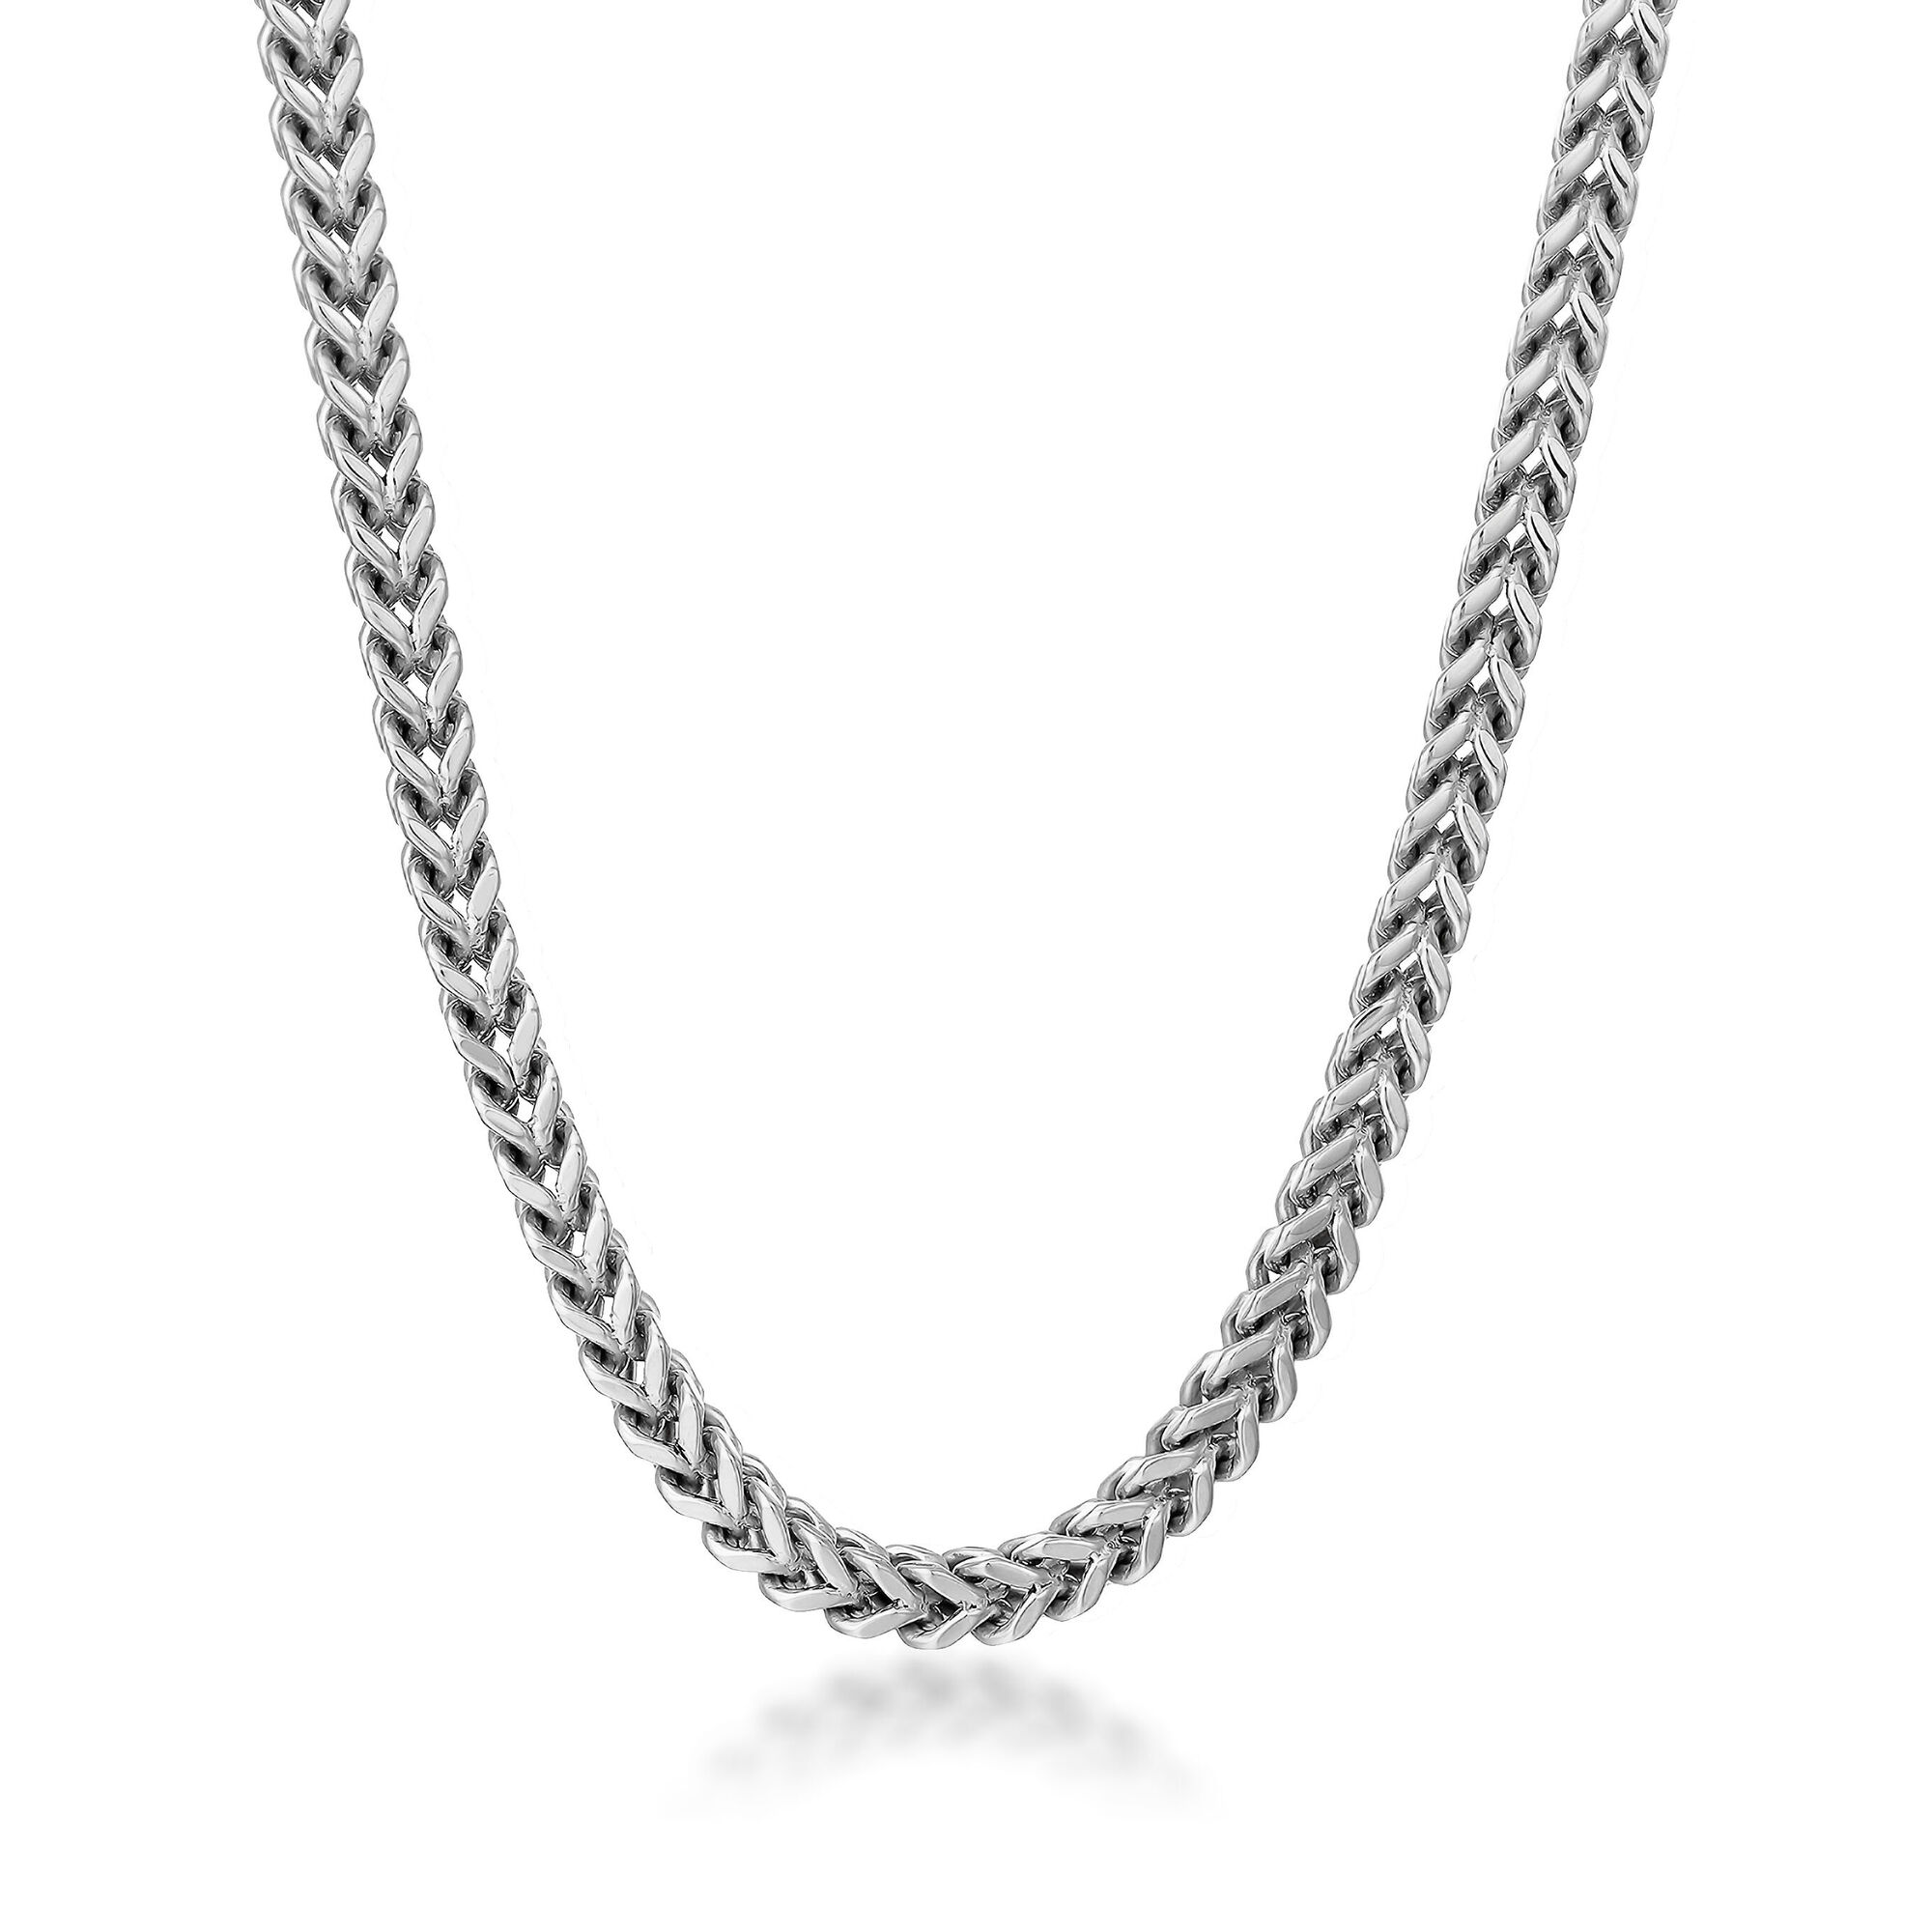 Men's Stainless Steel 6 MM Foxtail Chain Necklace - 22 Inch | Metro Jewelry